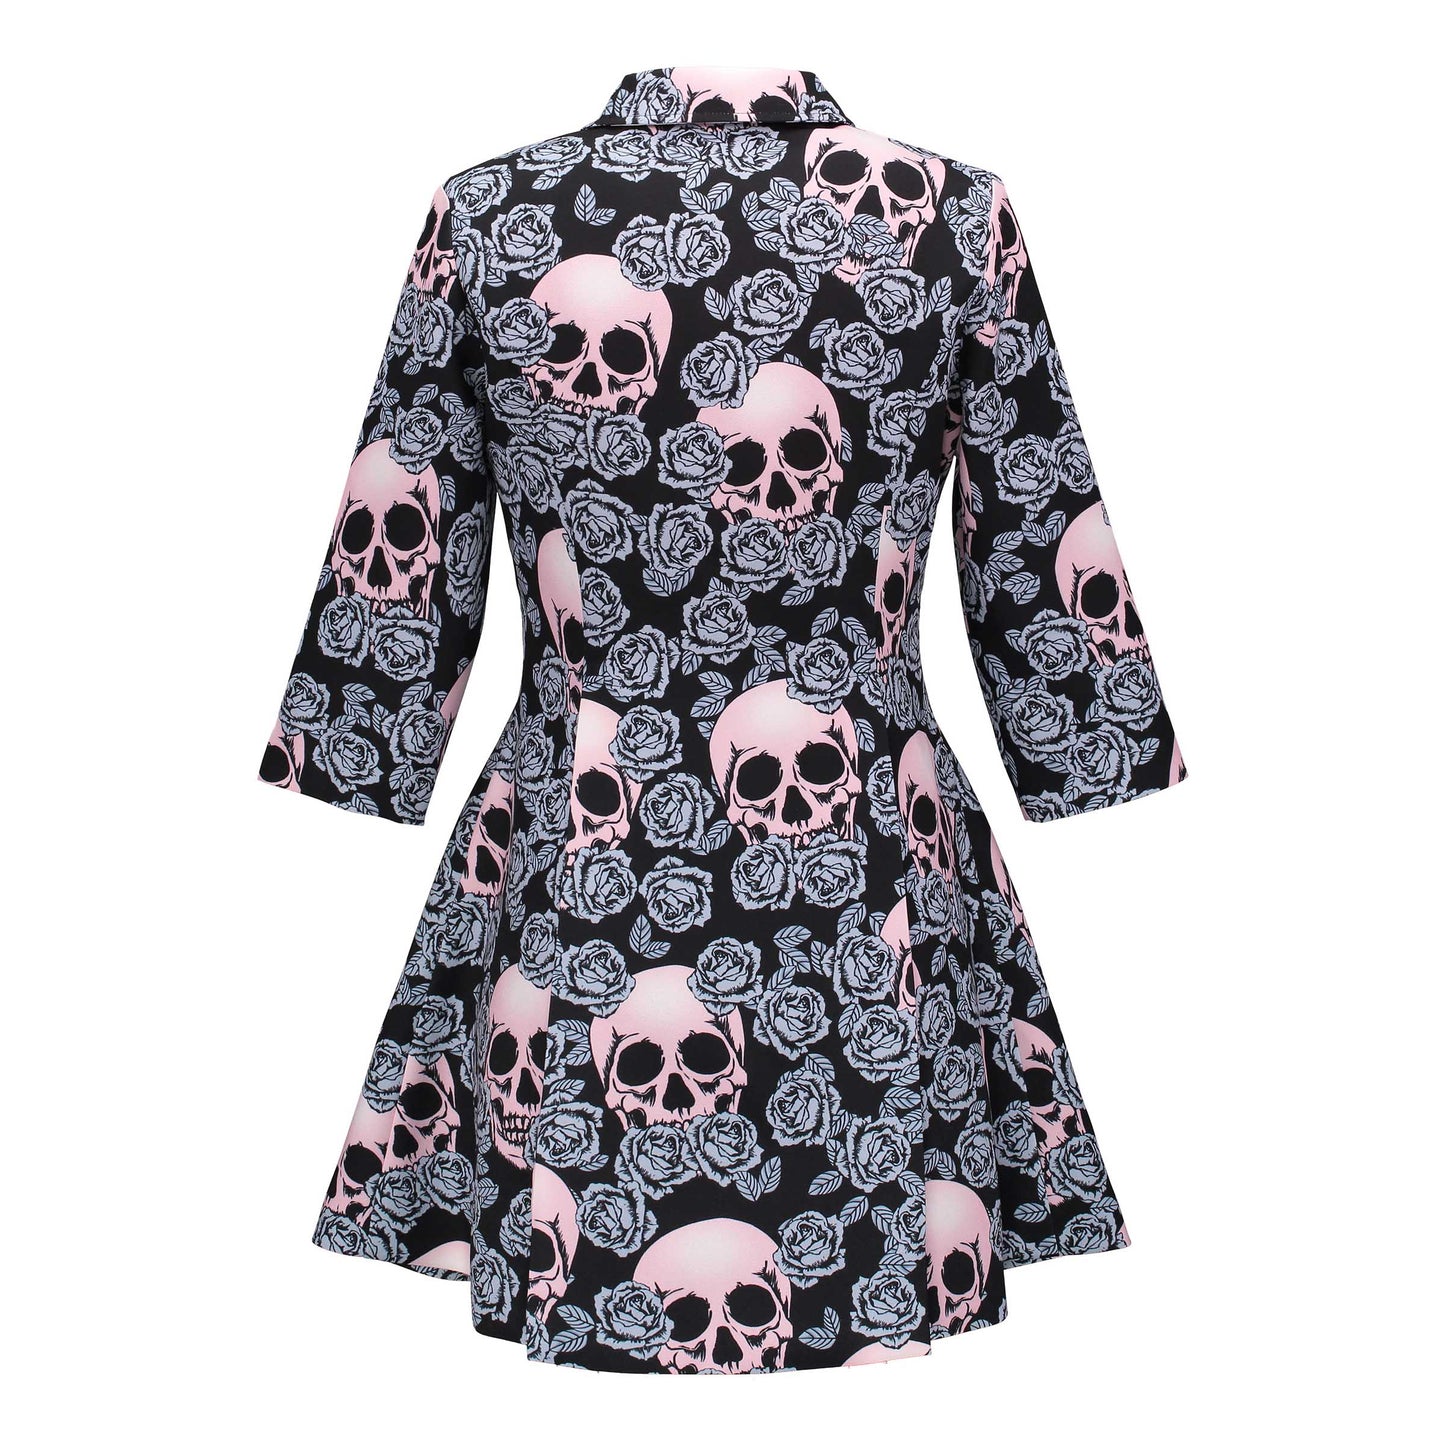 Gothic skull Mid-long Outerwear Jacket